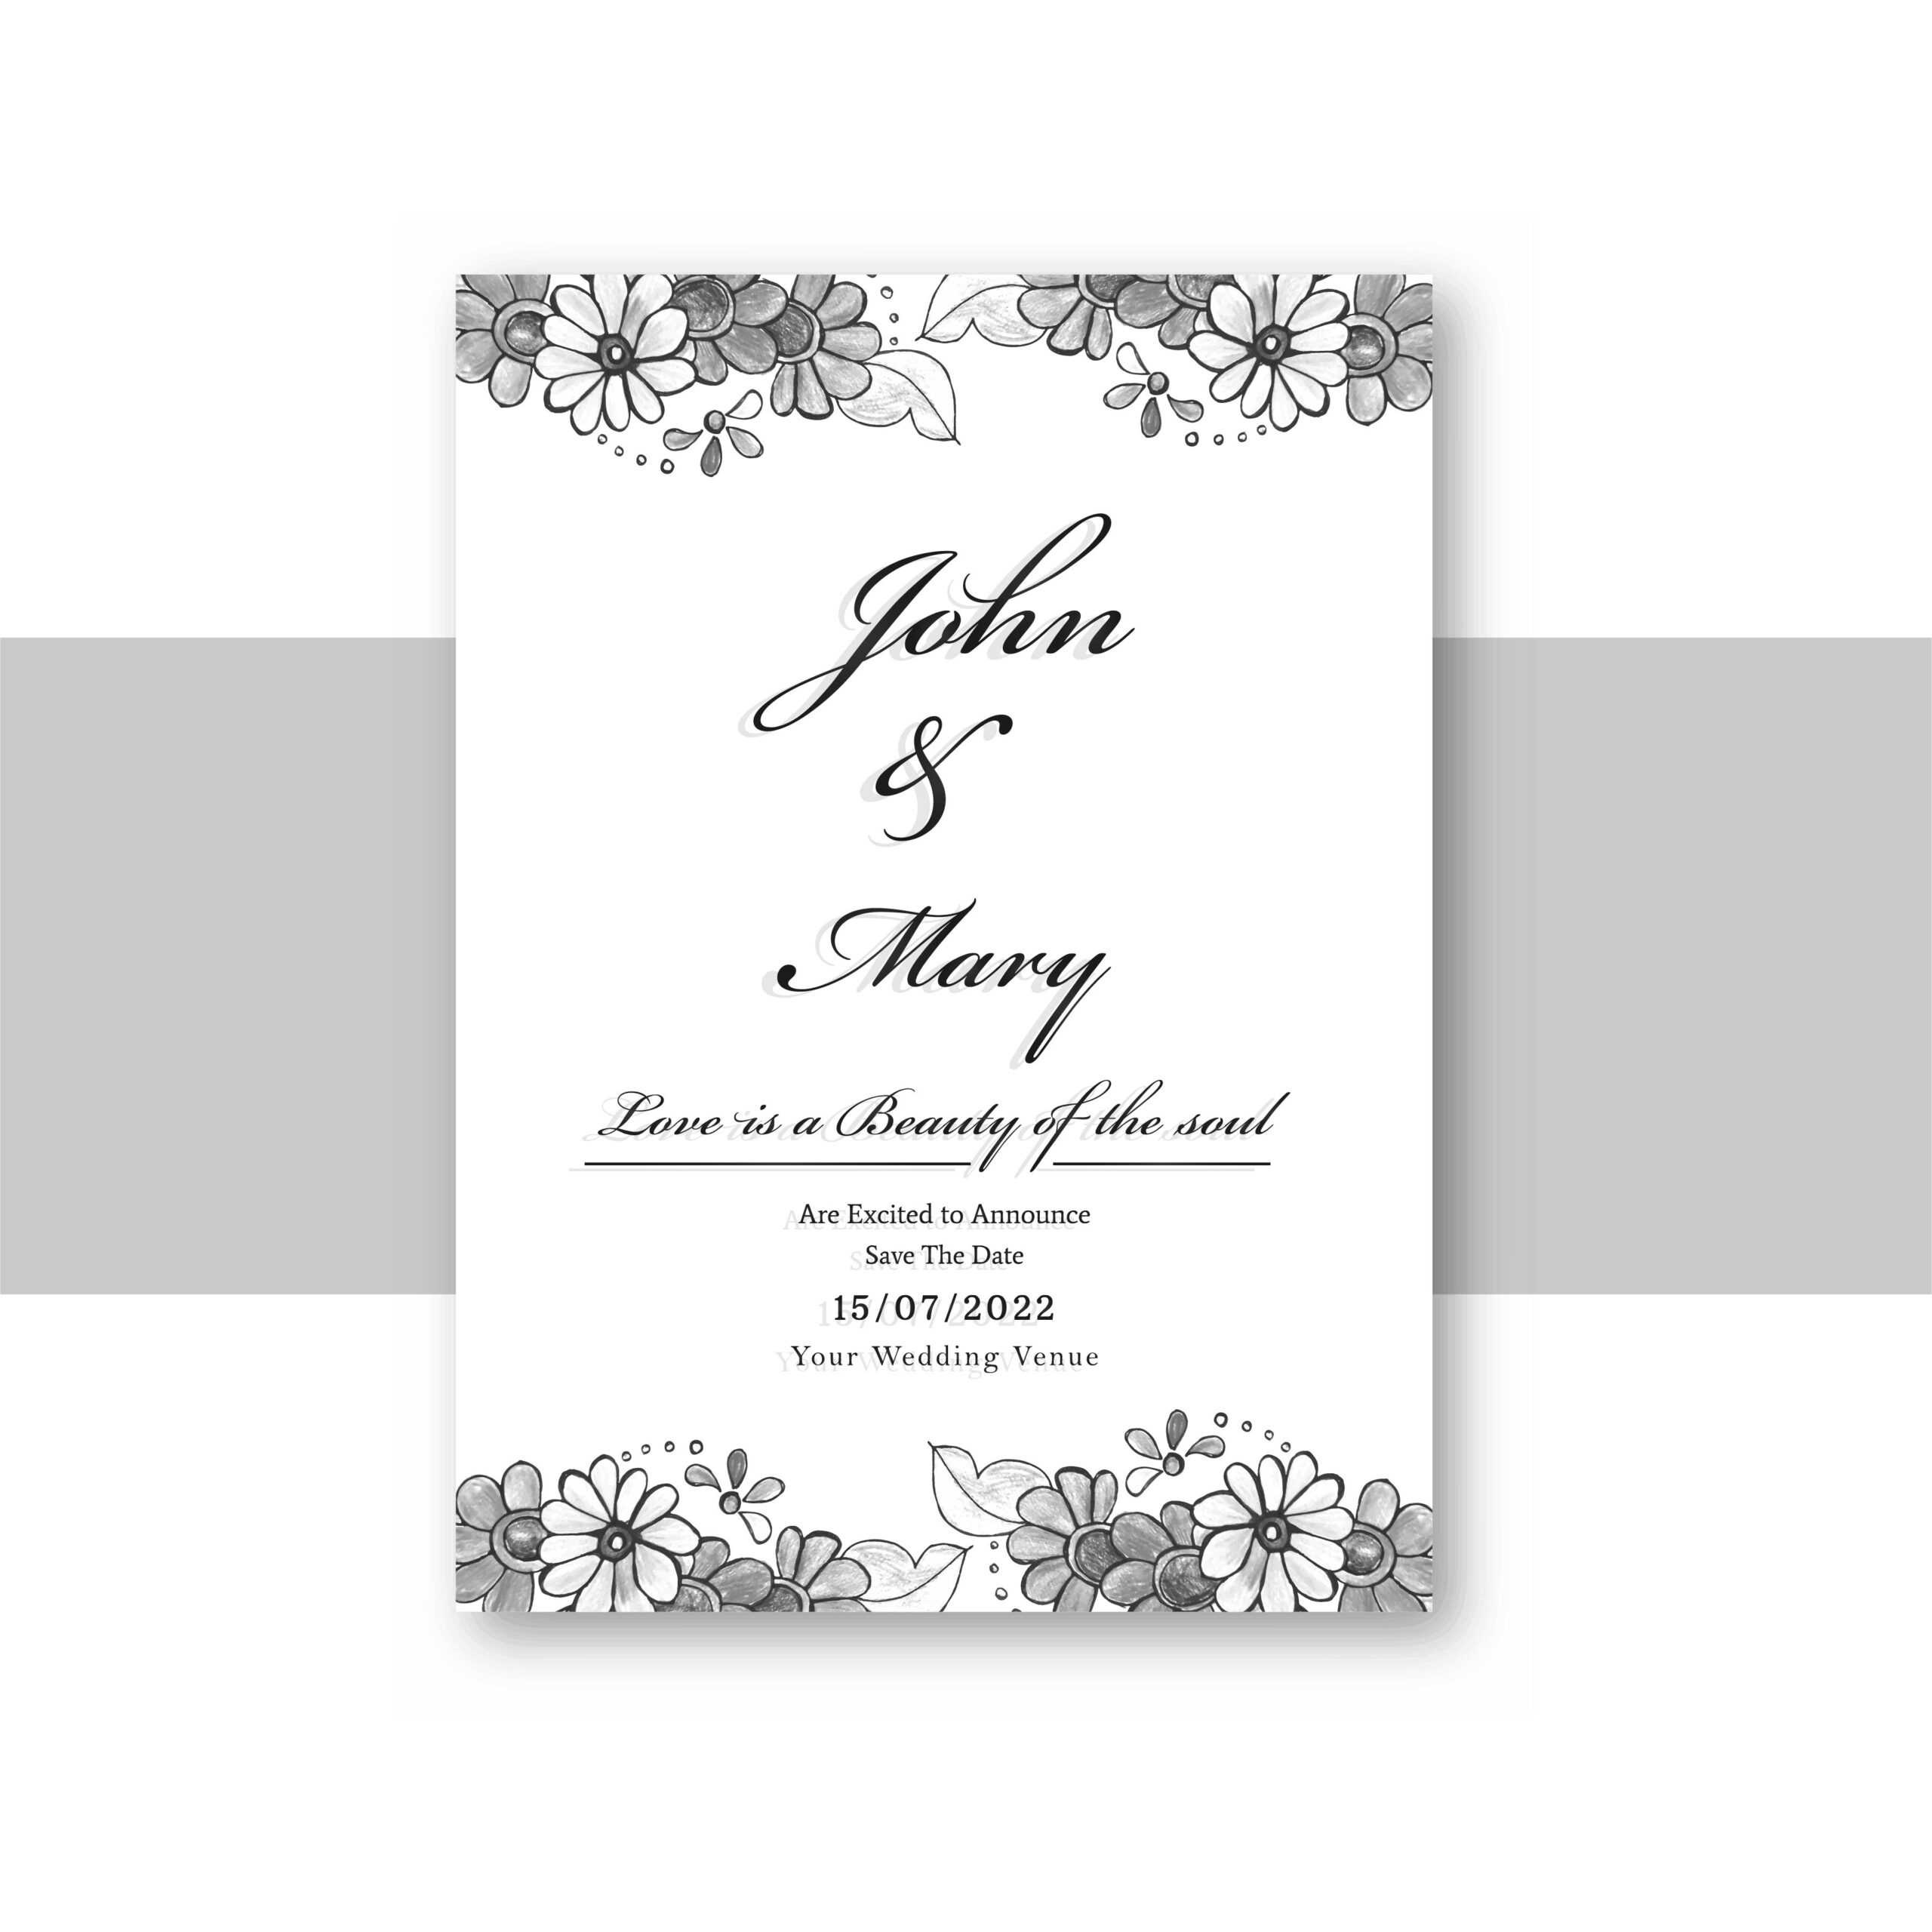 Beautiful Wedding Invitation Card Template With Decorative Intended For Invitation Cards Templates For Marriage